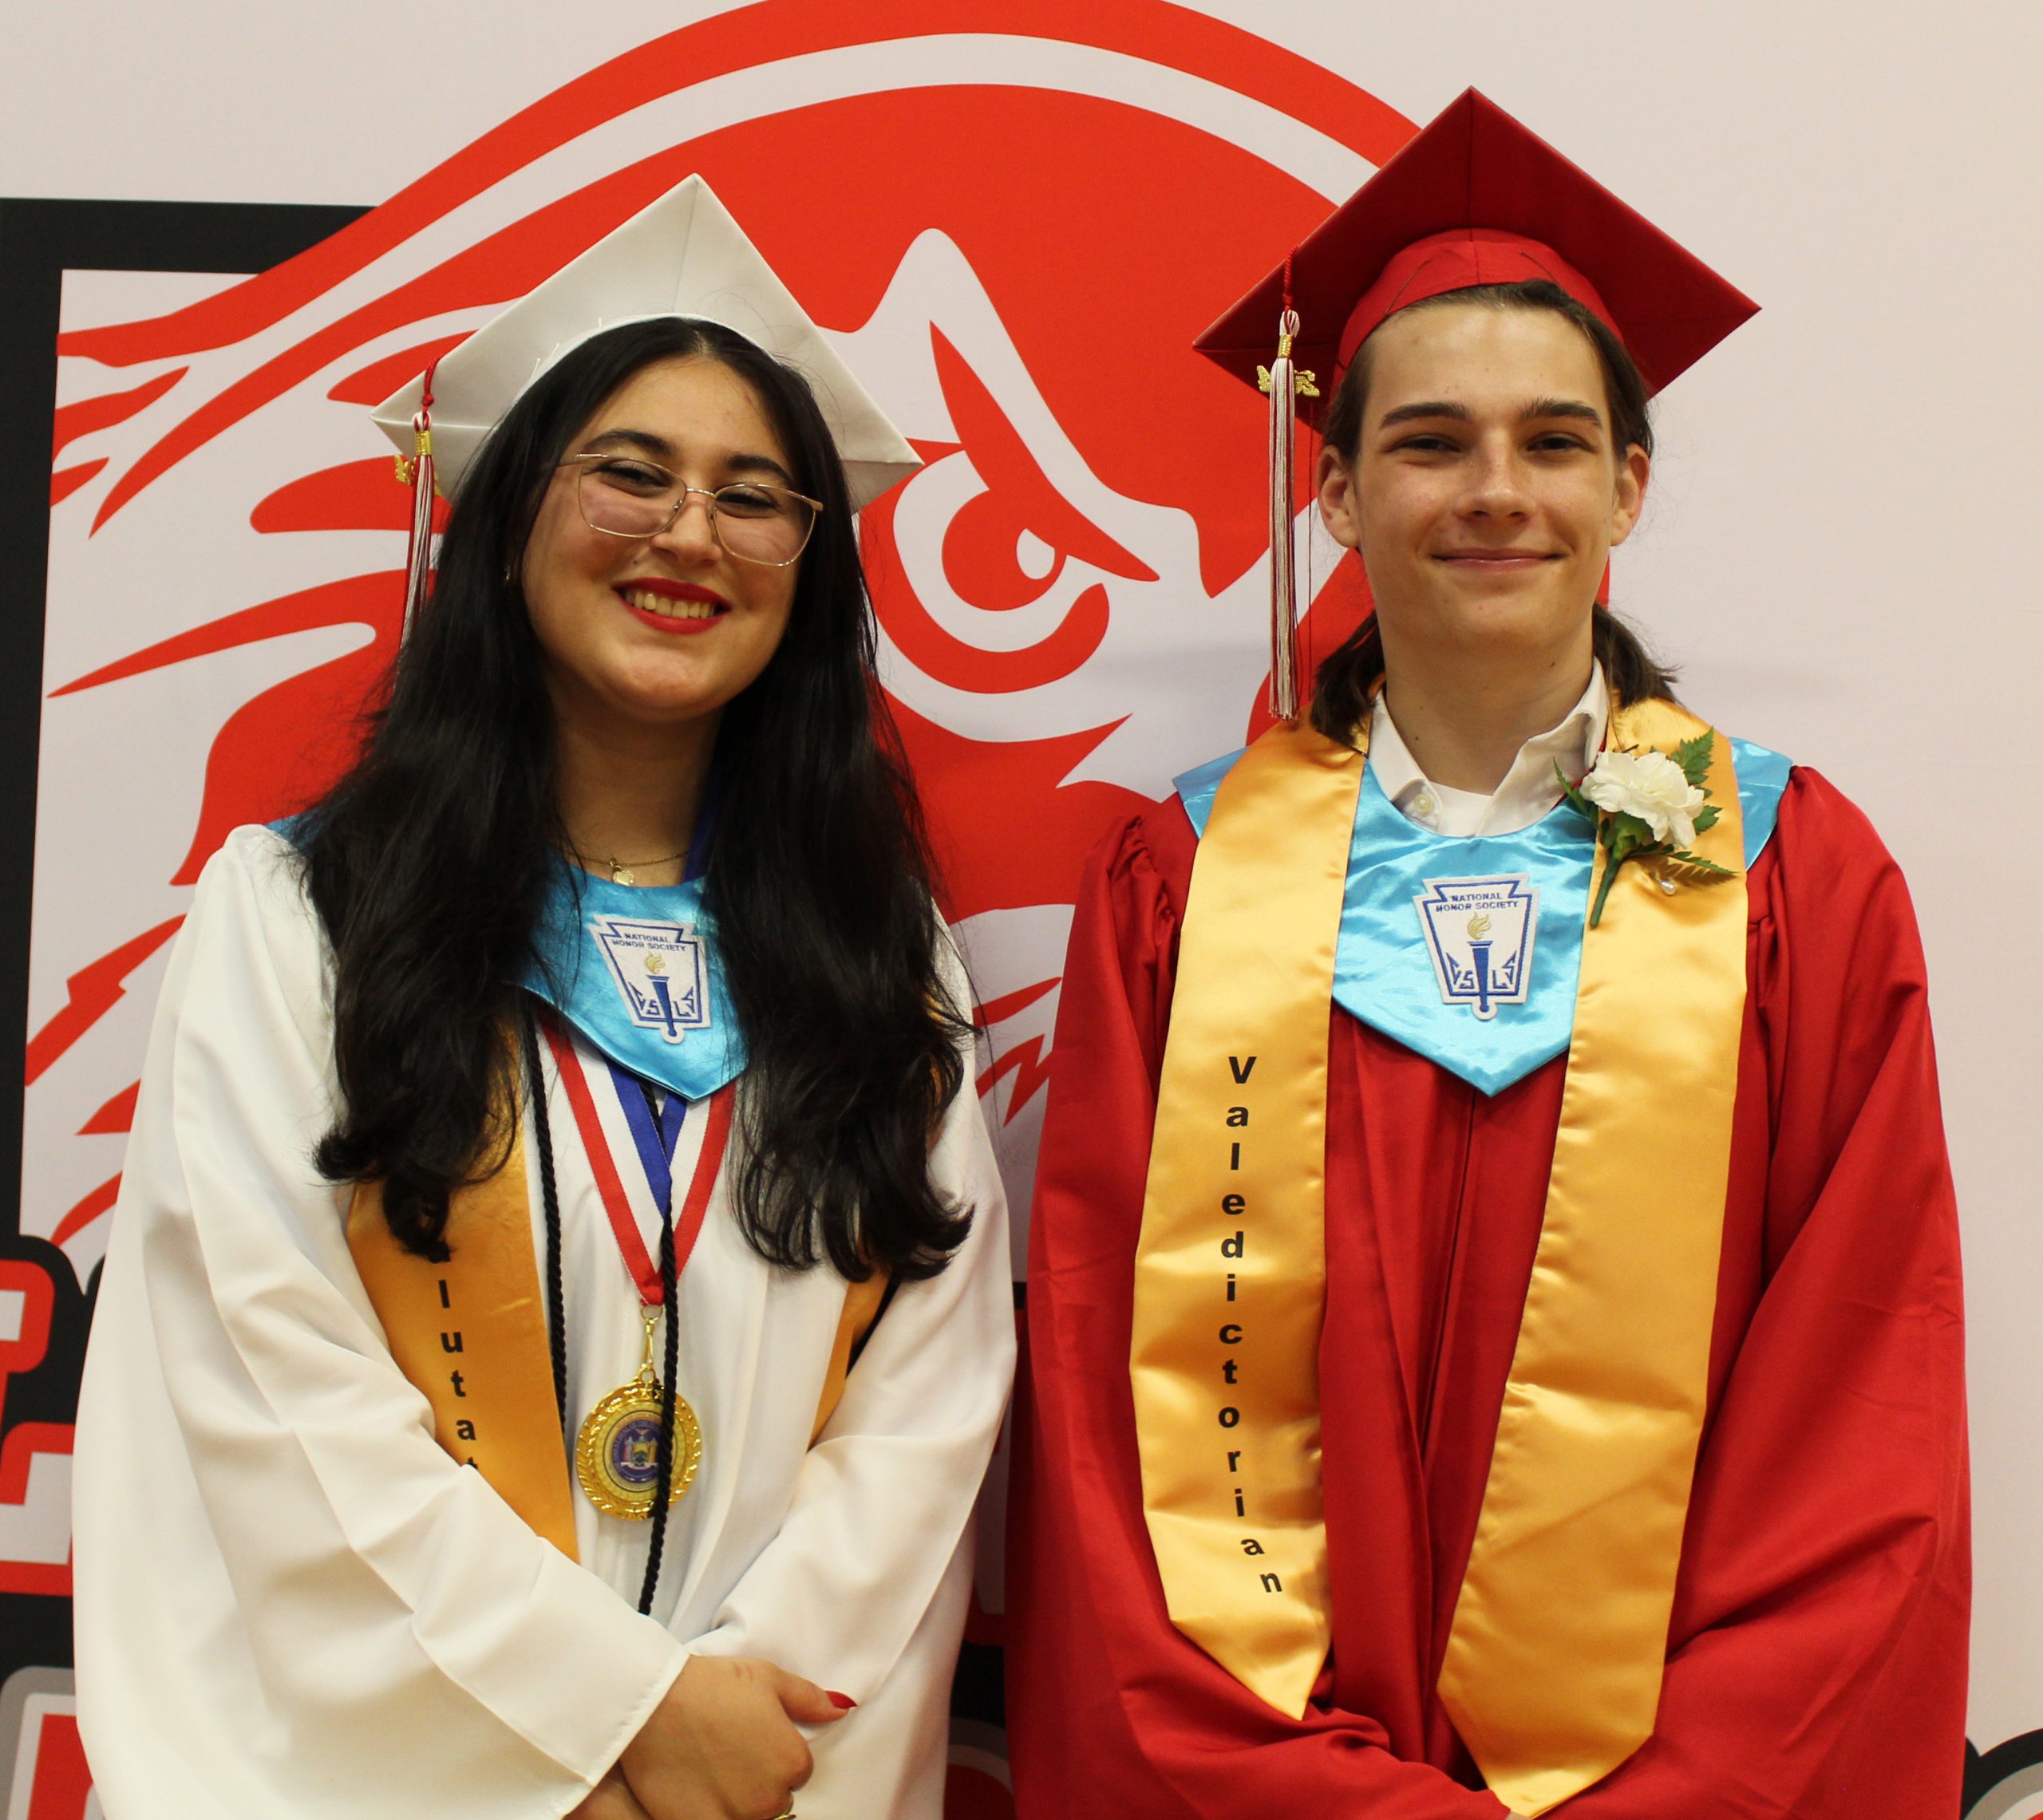 The valedictorian and salutatorian pose for a photo in front of the liberty logo.